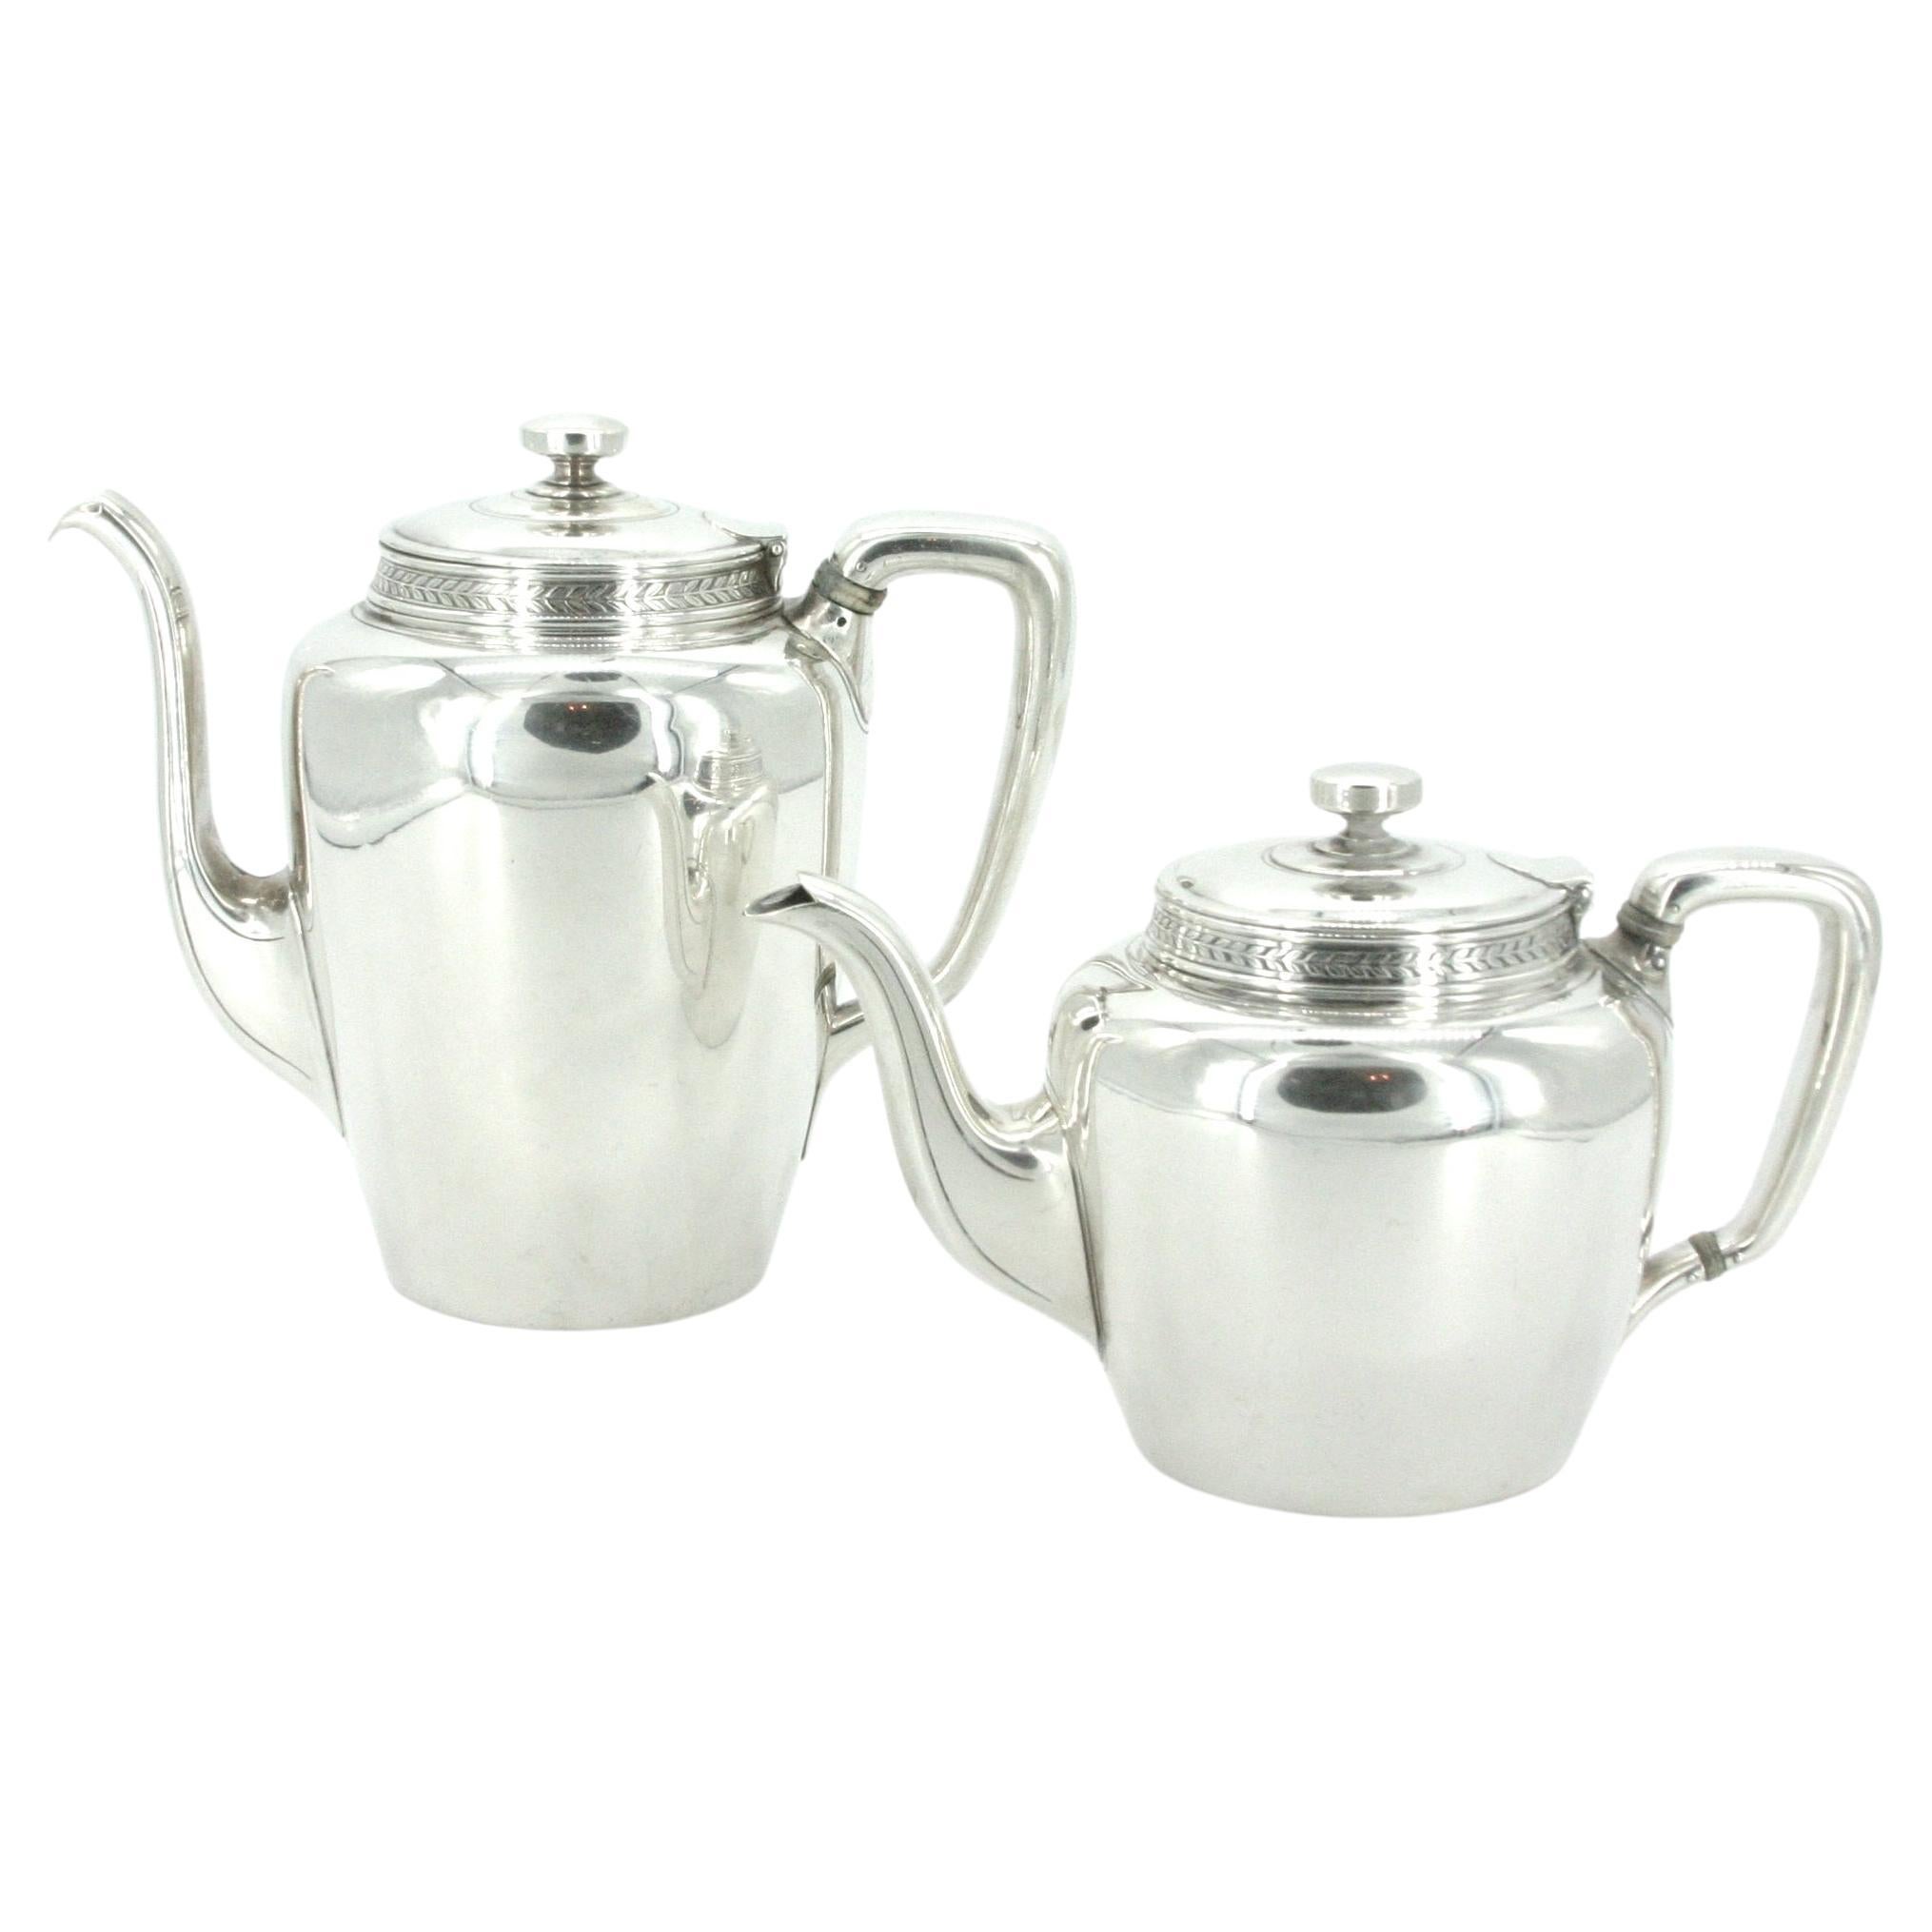 Tiffany sterling silver coffee and tea service. This set comprises 5 pieces: Coffee pot, teapot, creamer, sugar, and waste bowl. Each piece is great condition . Minor wear consistent with age / use . Maker's mark undersigned 